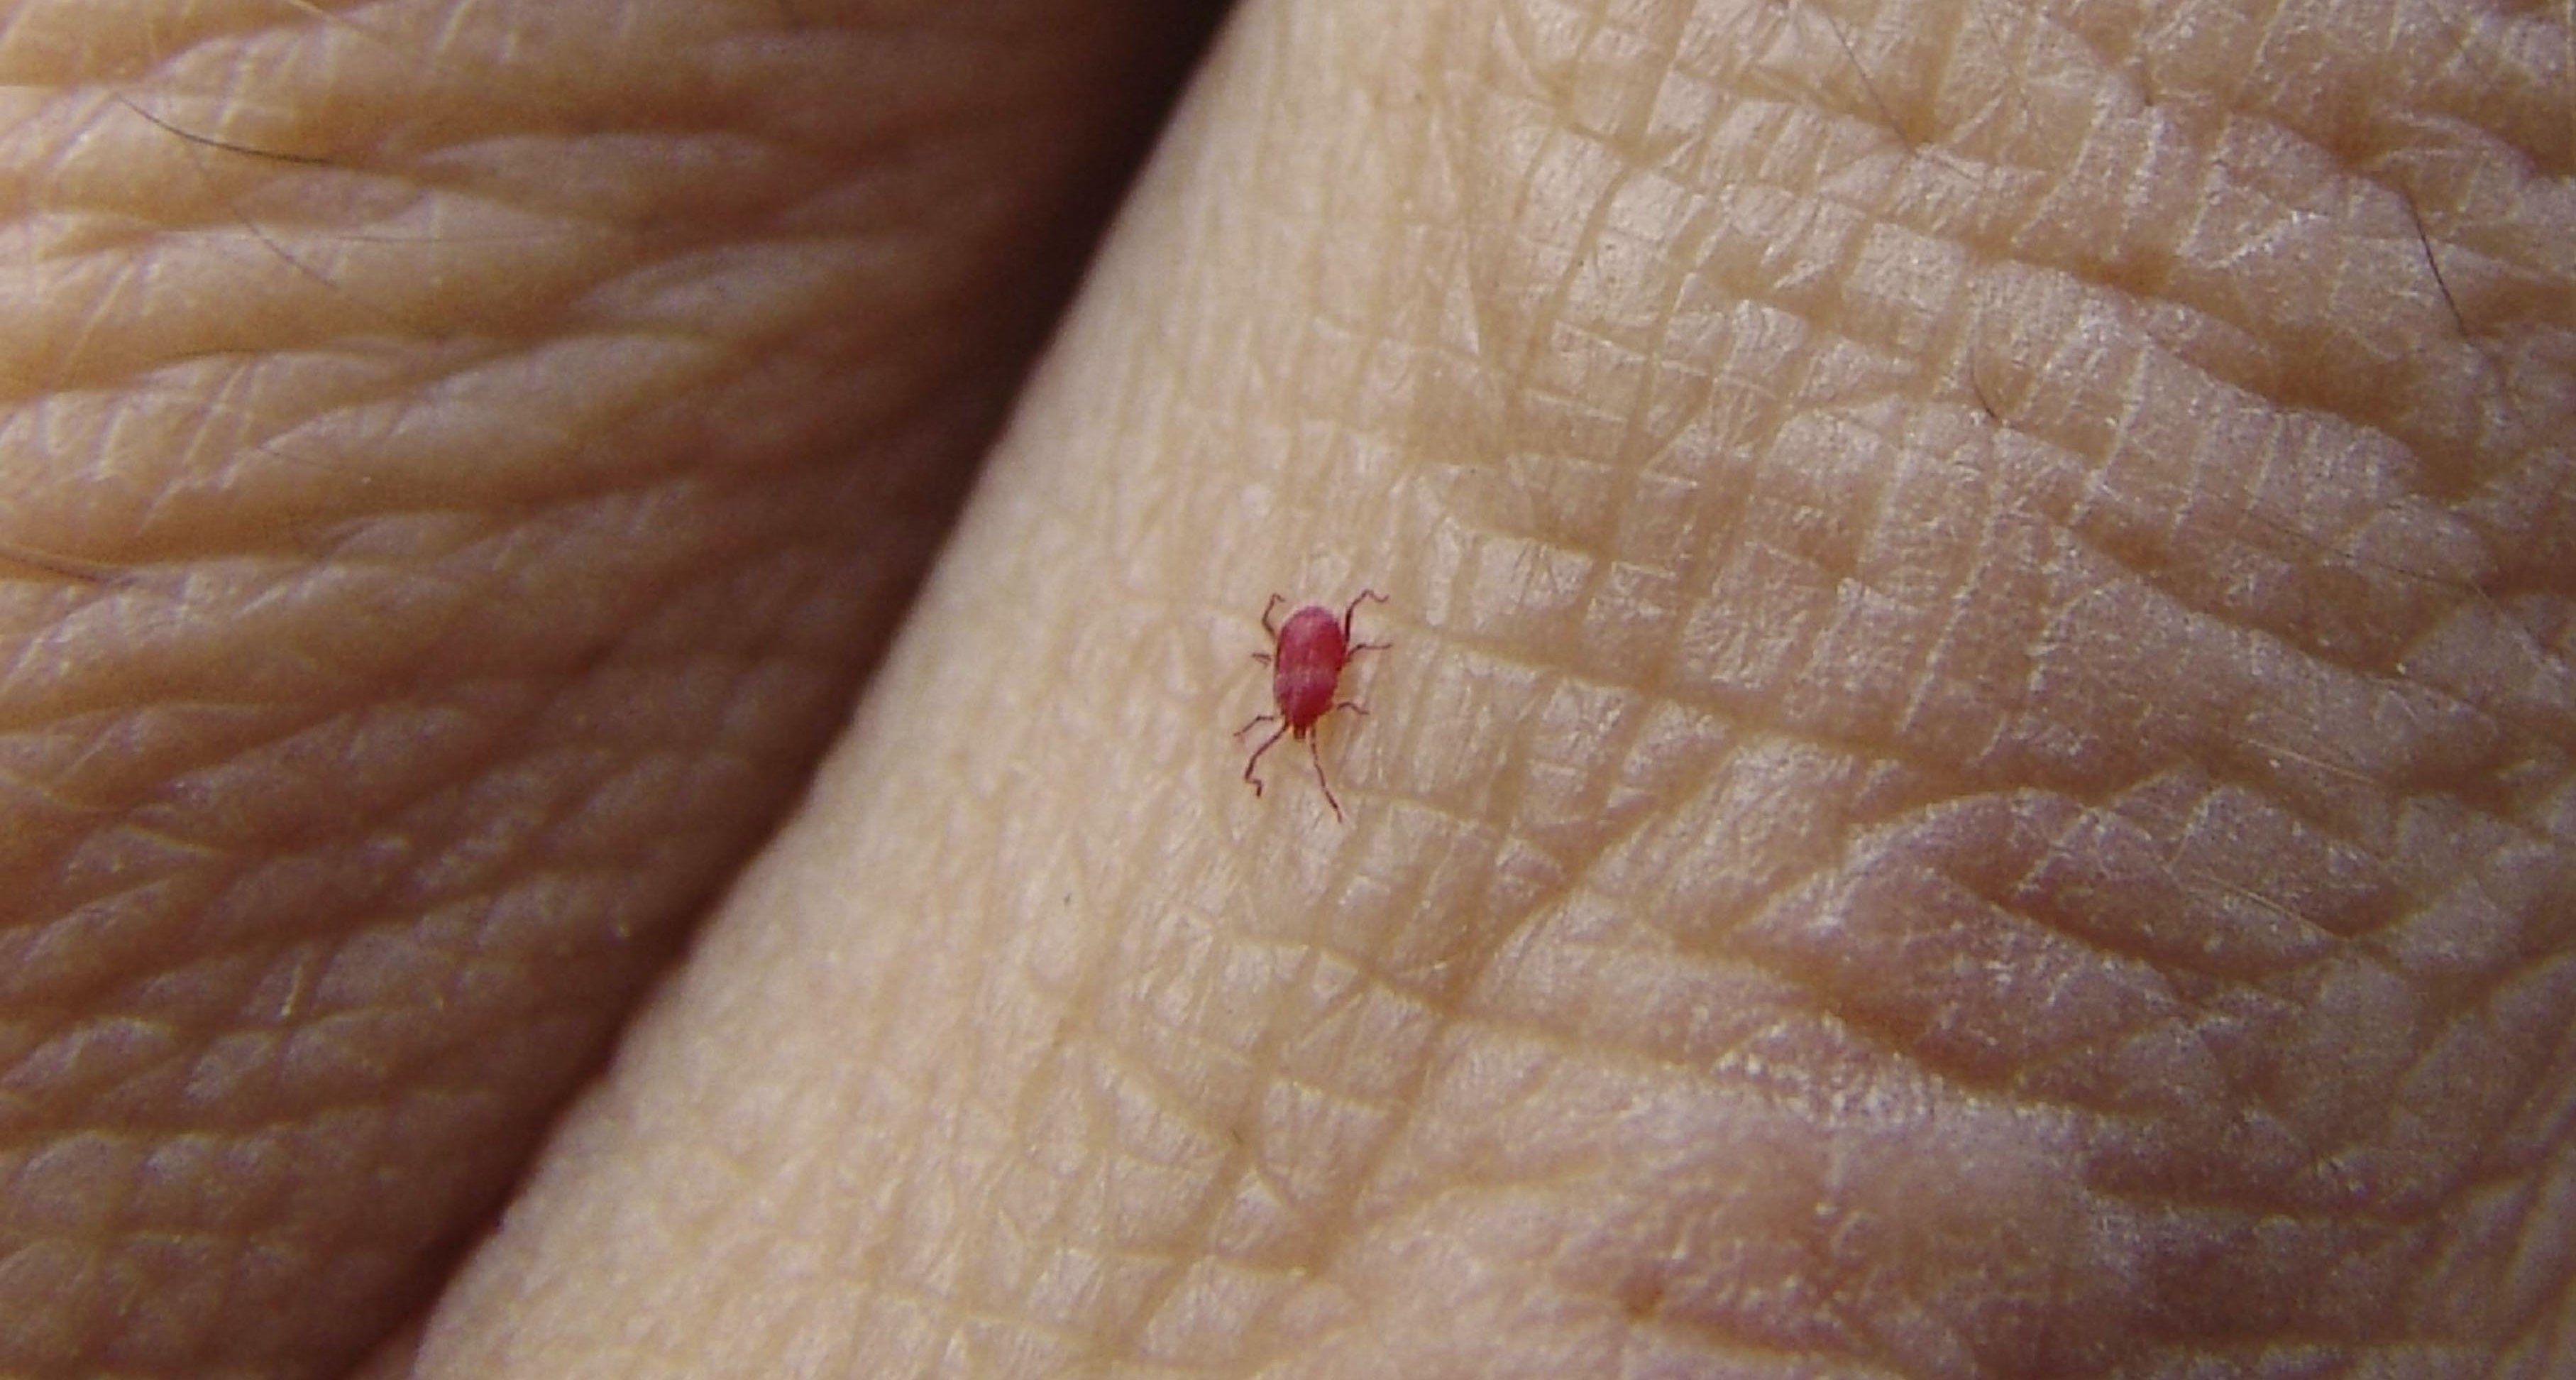 How to Get Rid of Chiggers - Eliminate Red Mites and Bugs From Your Yard